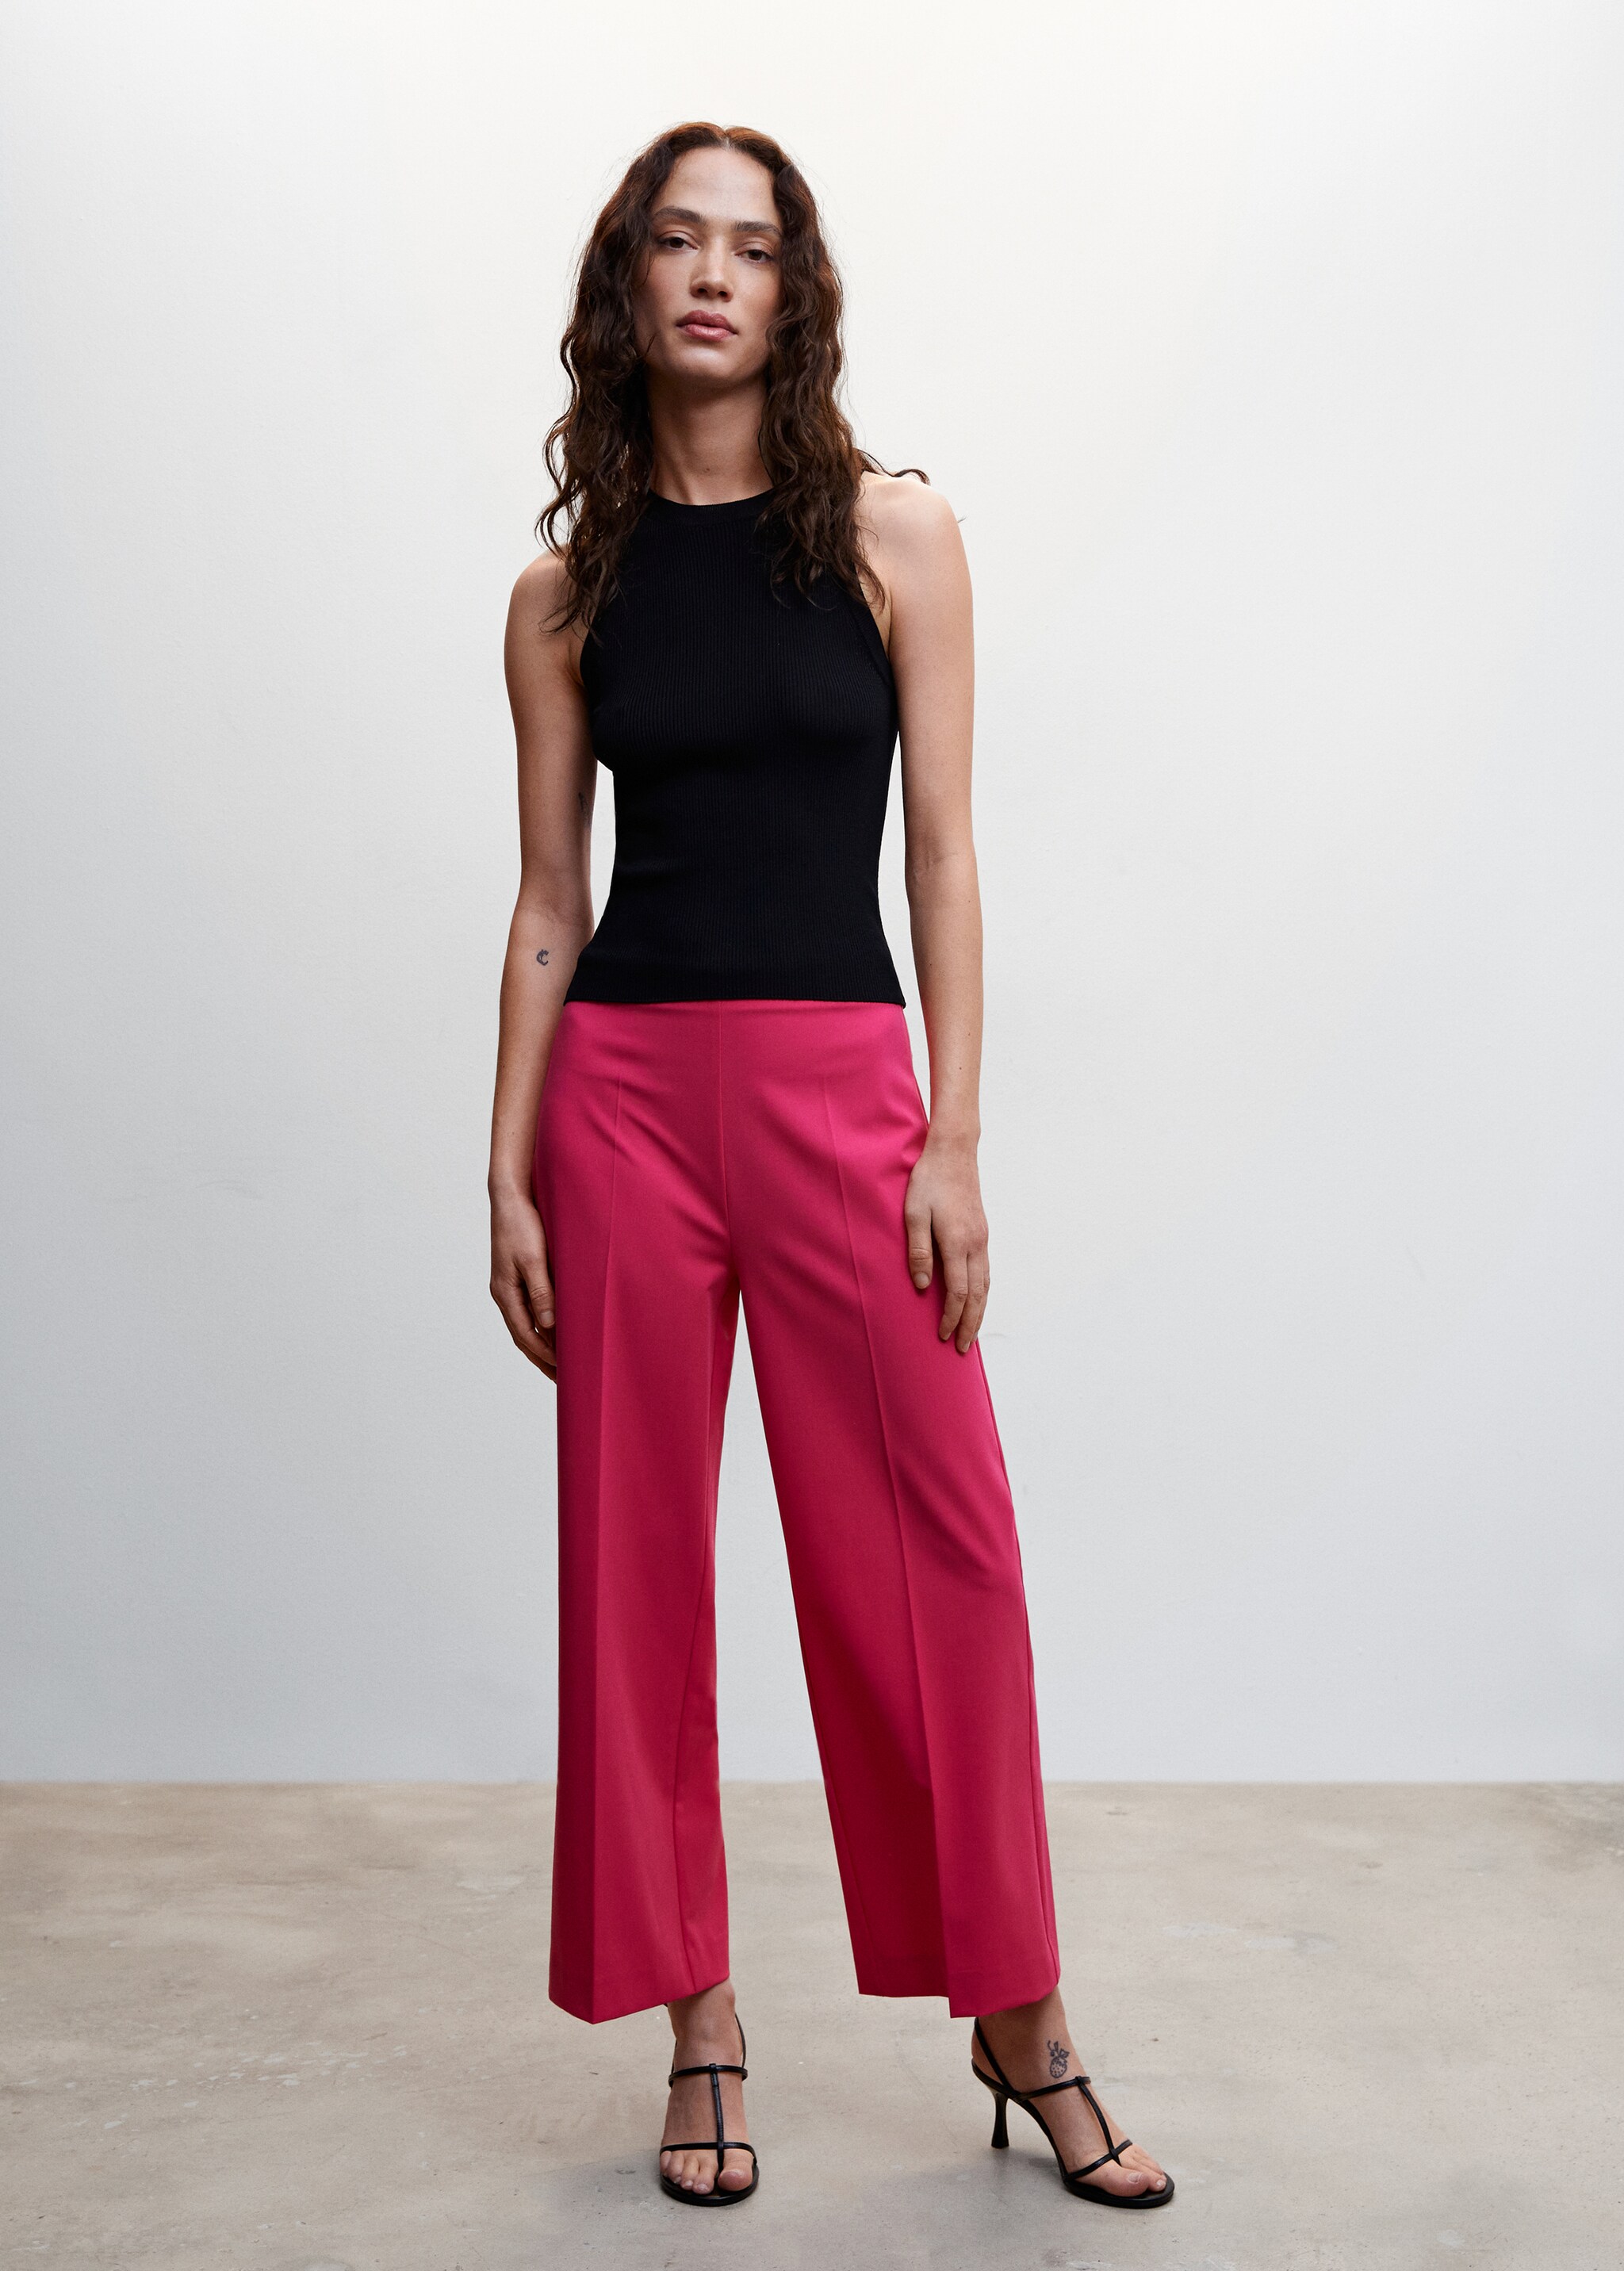 Straight culotte trousers - General plane